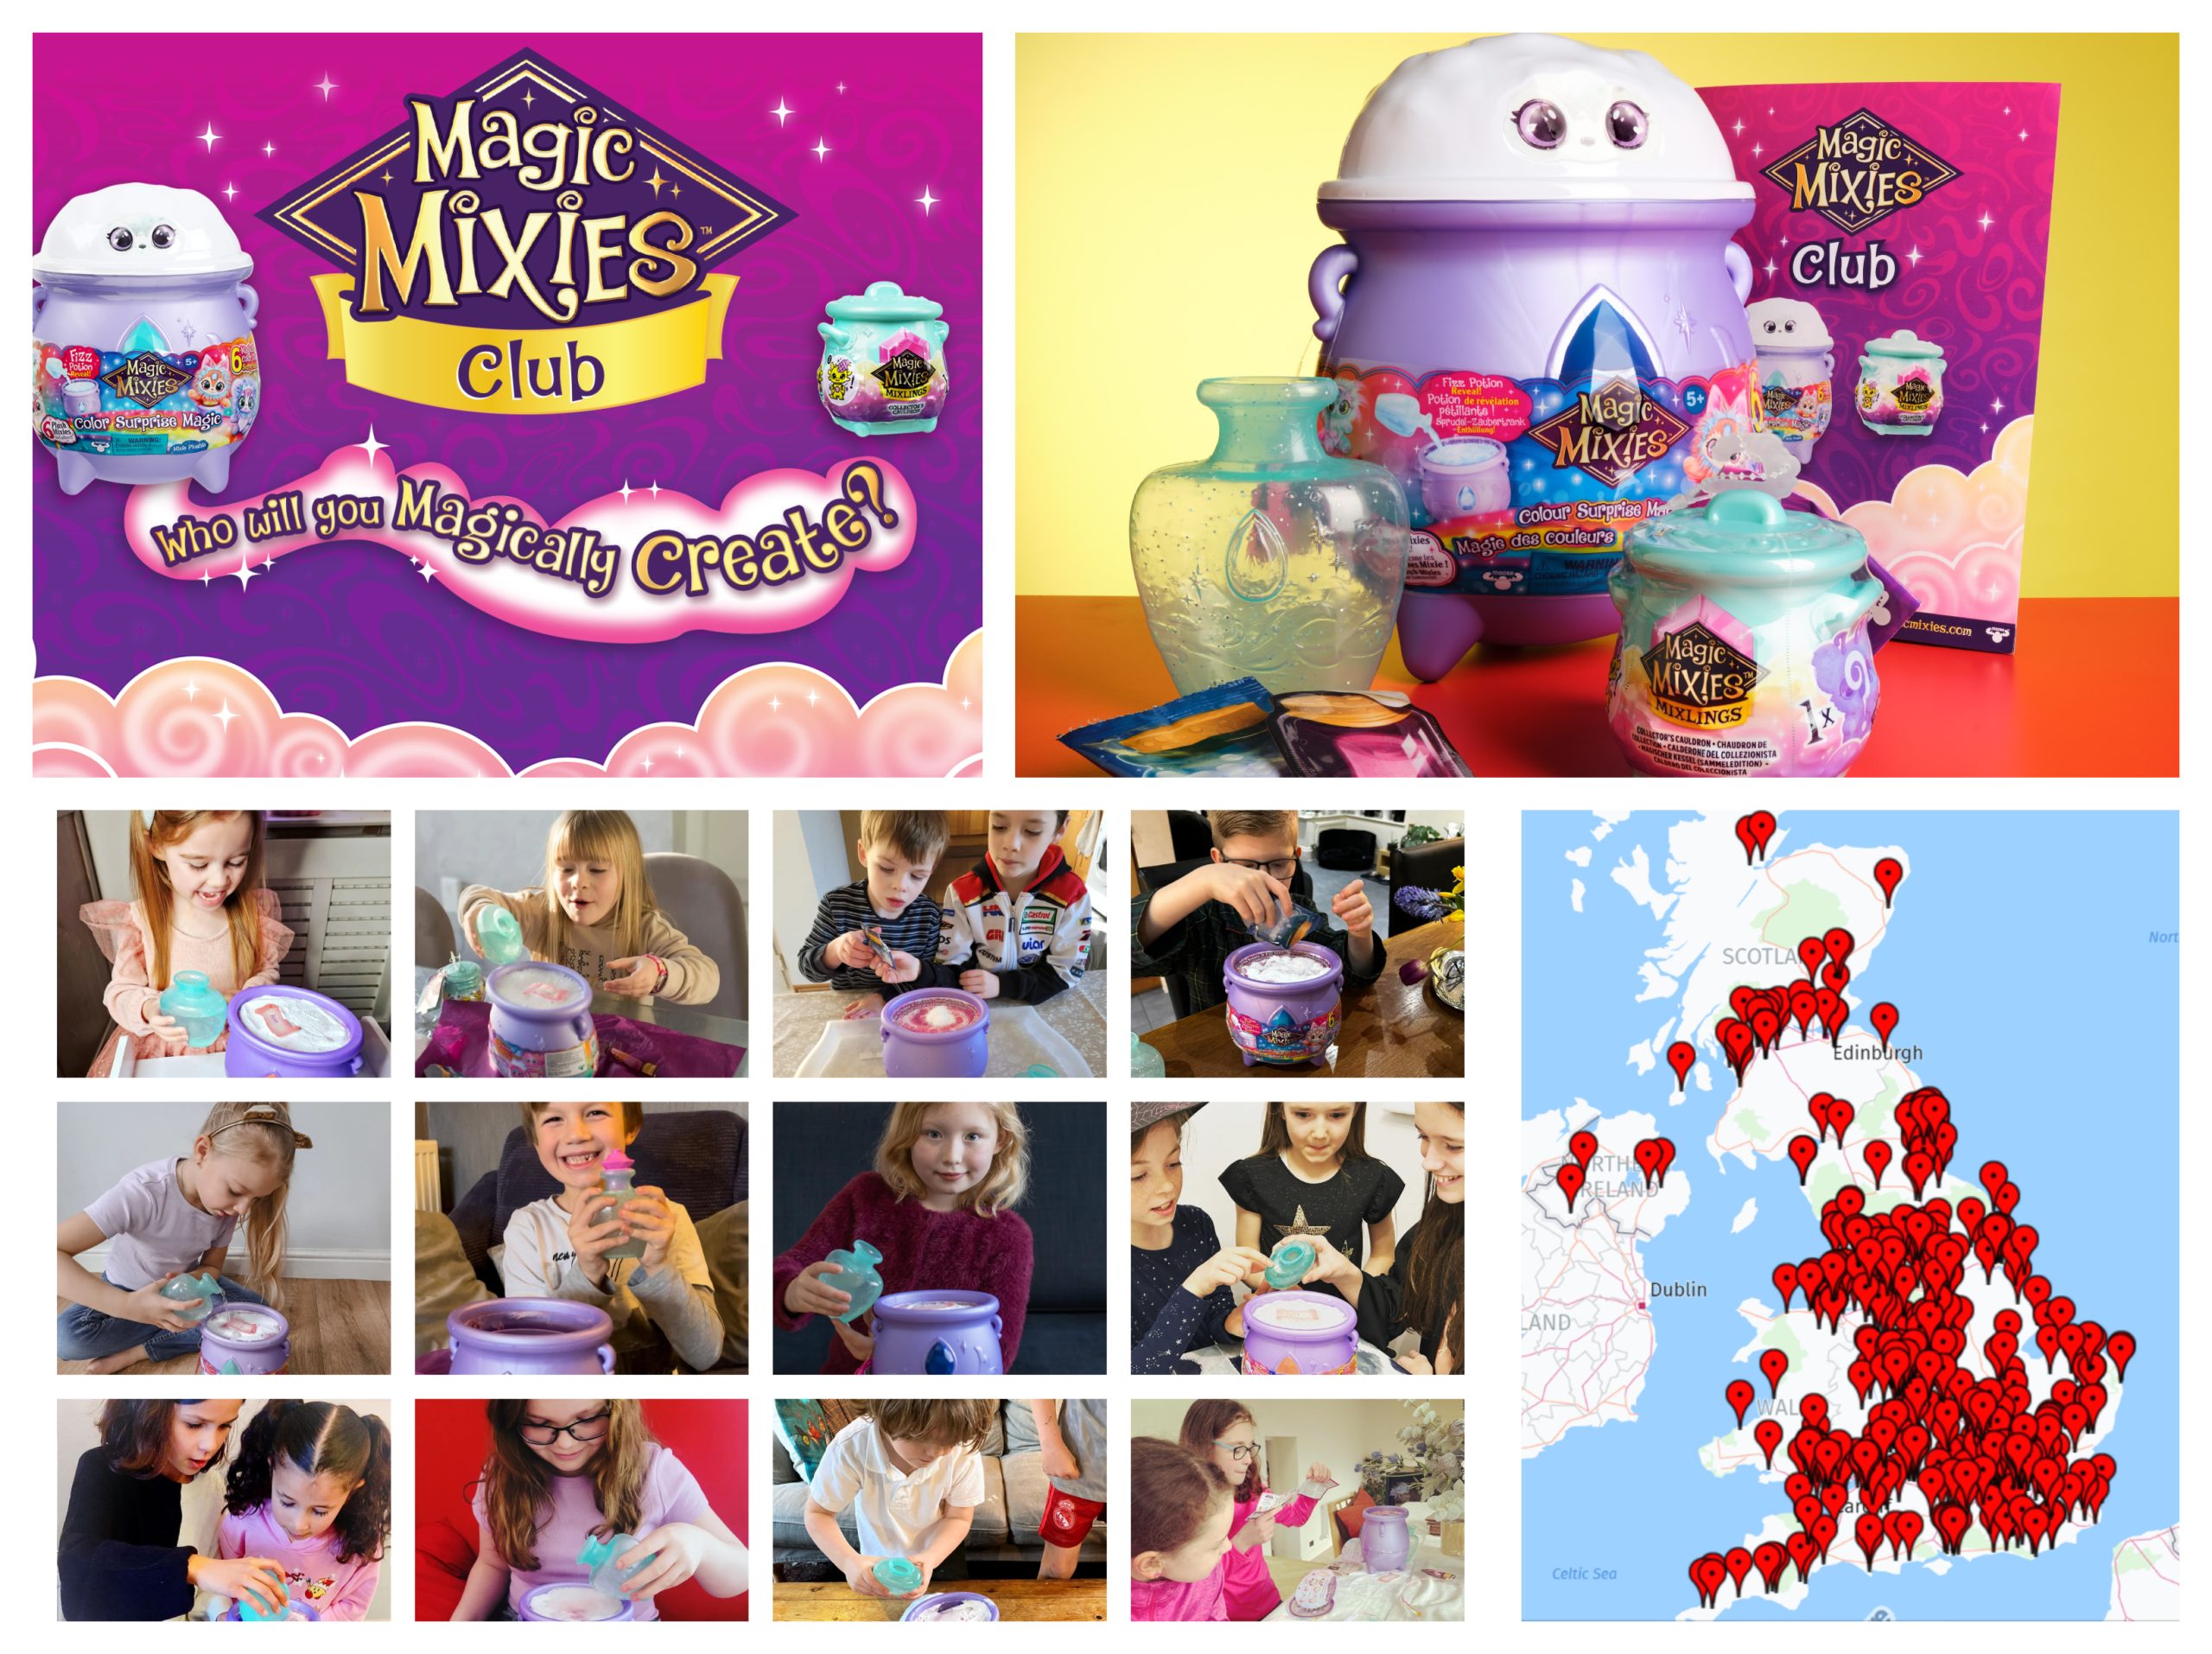 Magic Mixies Brand Page - Moose Toys